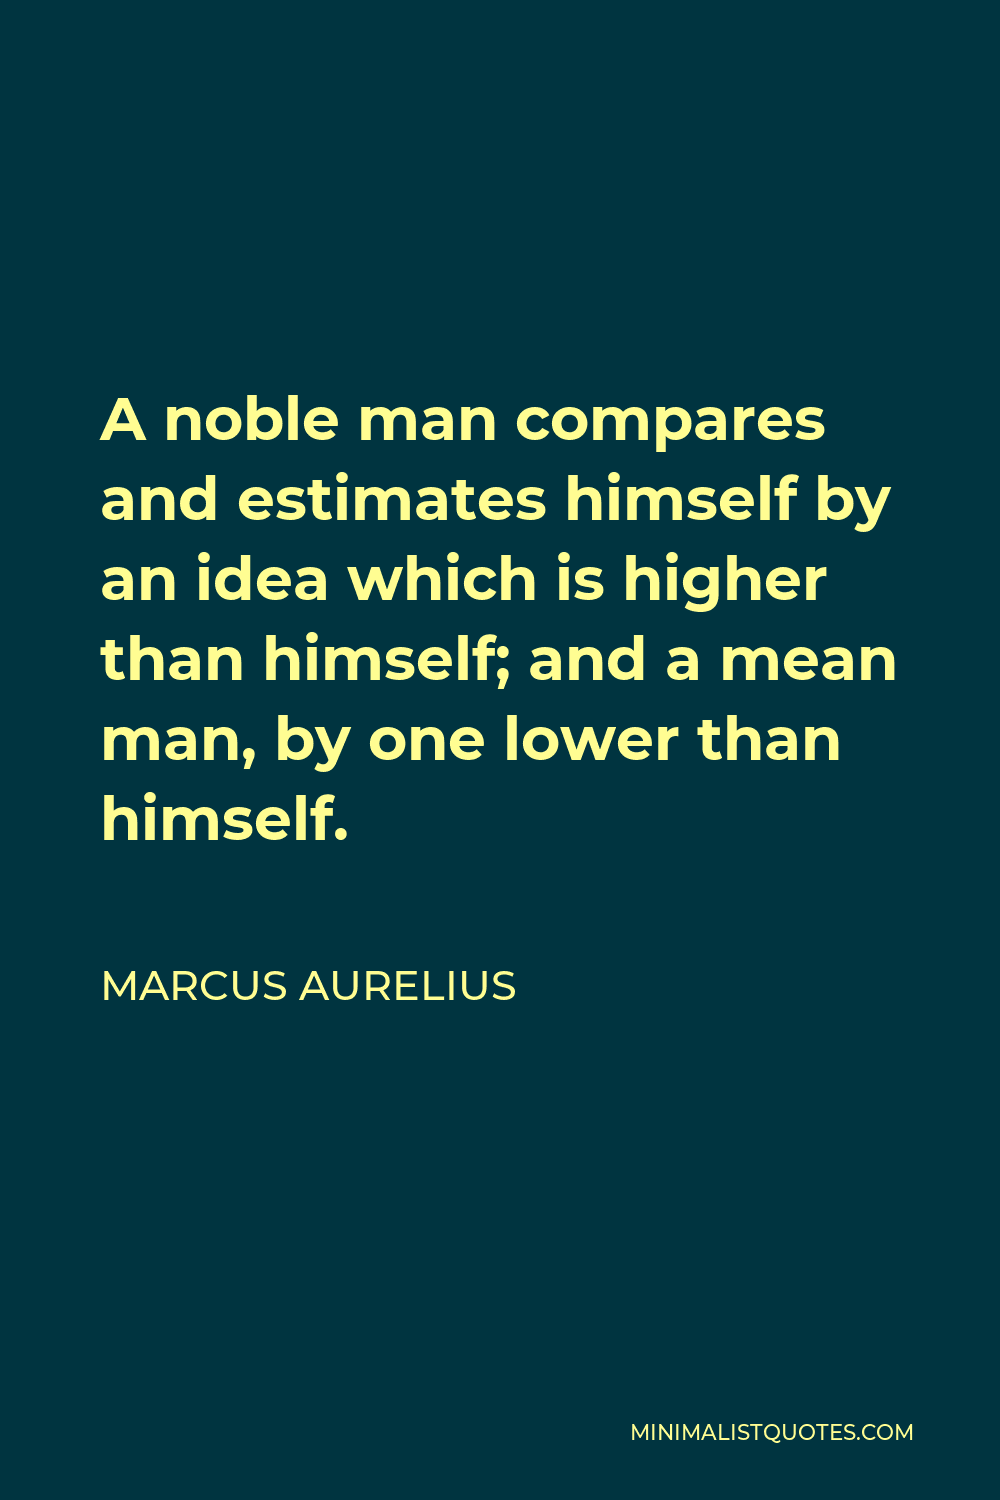 Marcus Aurelius Quote - A noble man compares and estimates himself by an idea which is higher than himself; and a mean man, by one lower than himself.